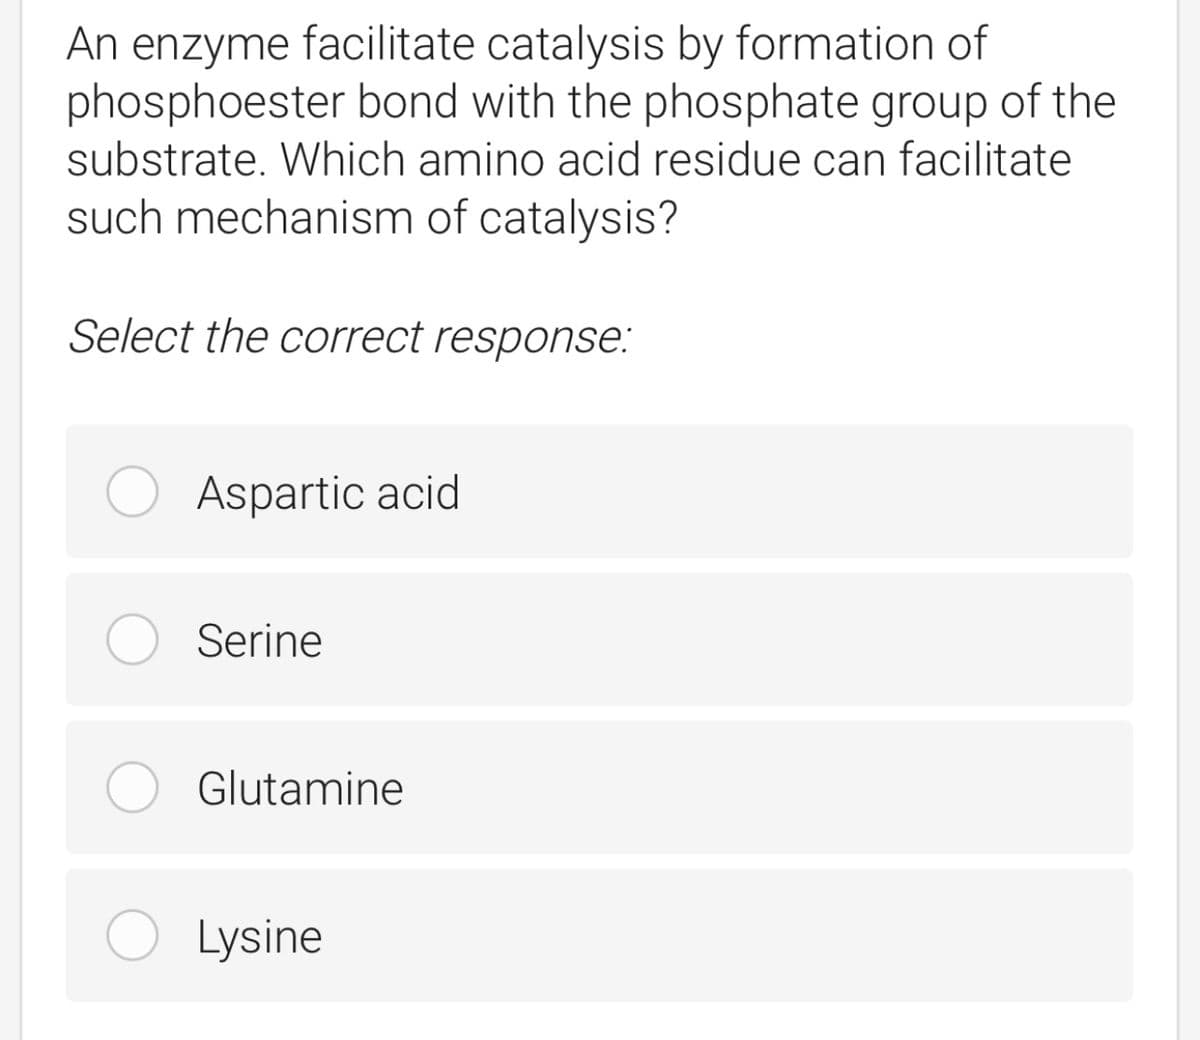 An enzyme facilitate catalysis by formation of
phosphoester bond with the phosphate group of the
substrate. Which amino acid residue can facilitate
such mechanism of catalysis?
Select the correct response:
Aspartic acid
Serine
Glutamine
Lysine